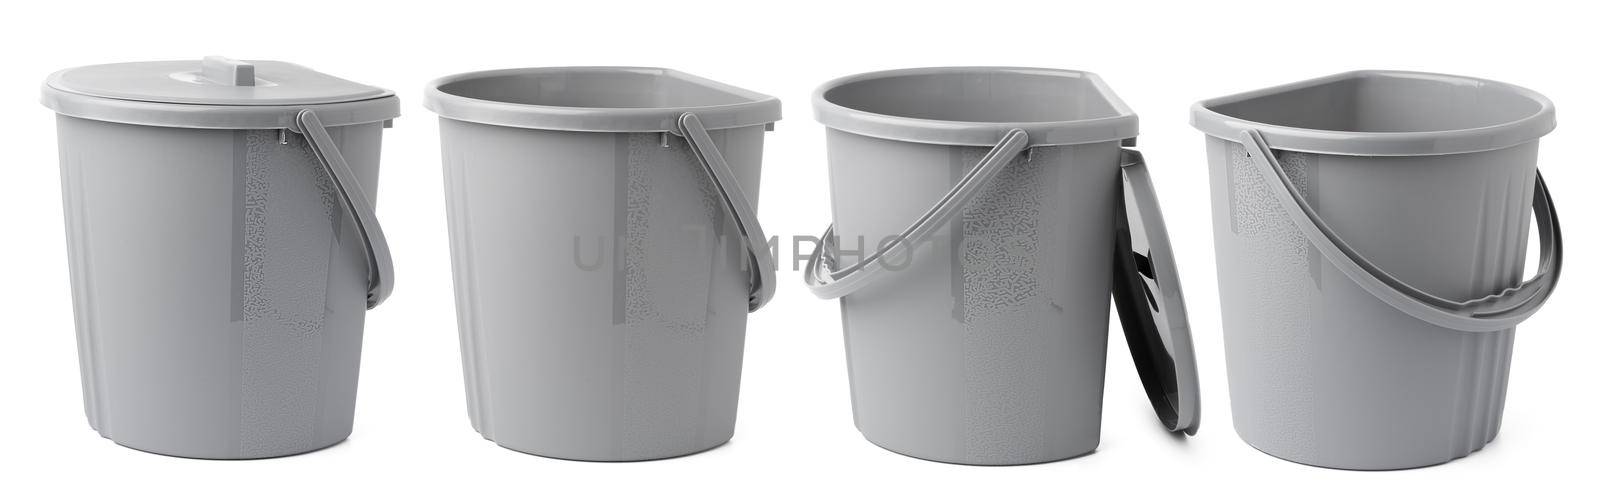 Plastic bucket group with handle isolated on white background